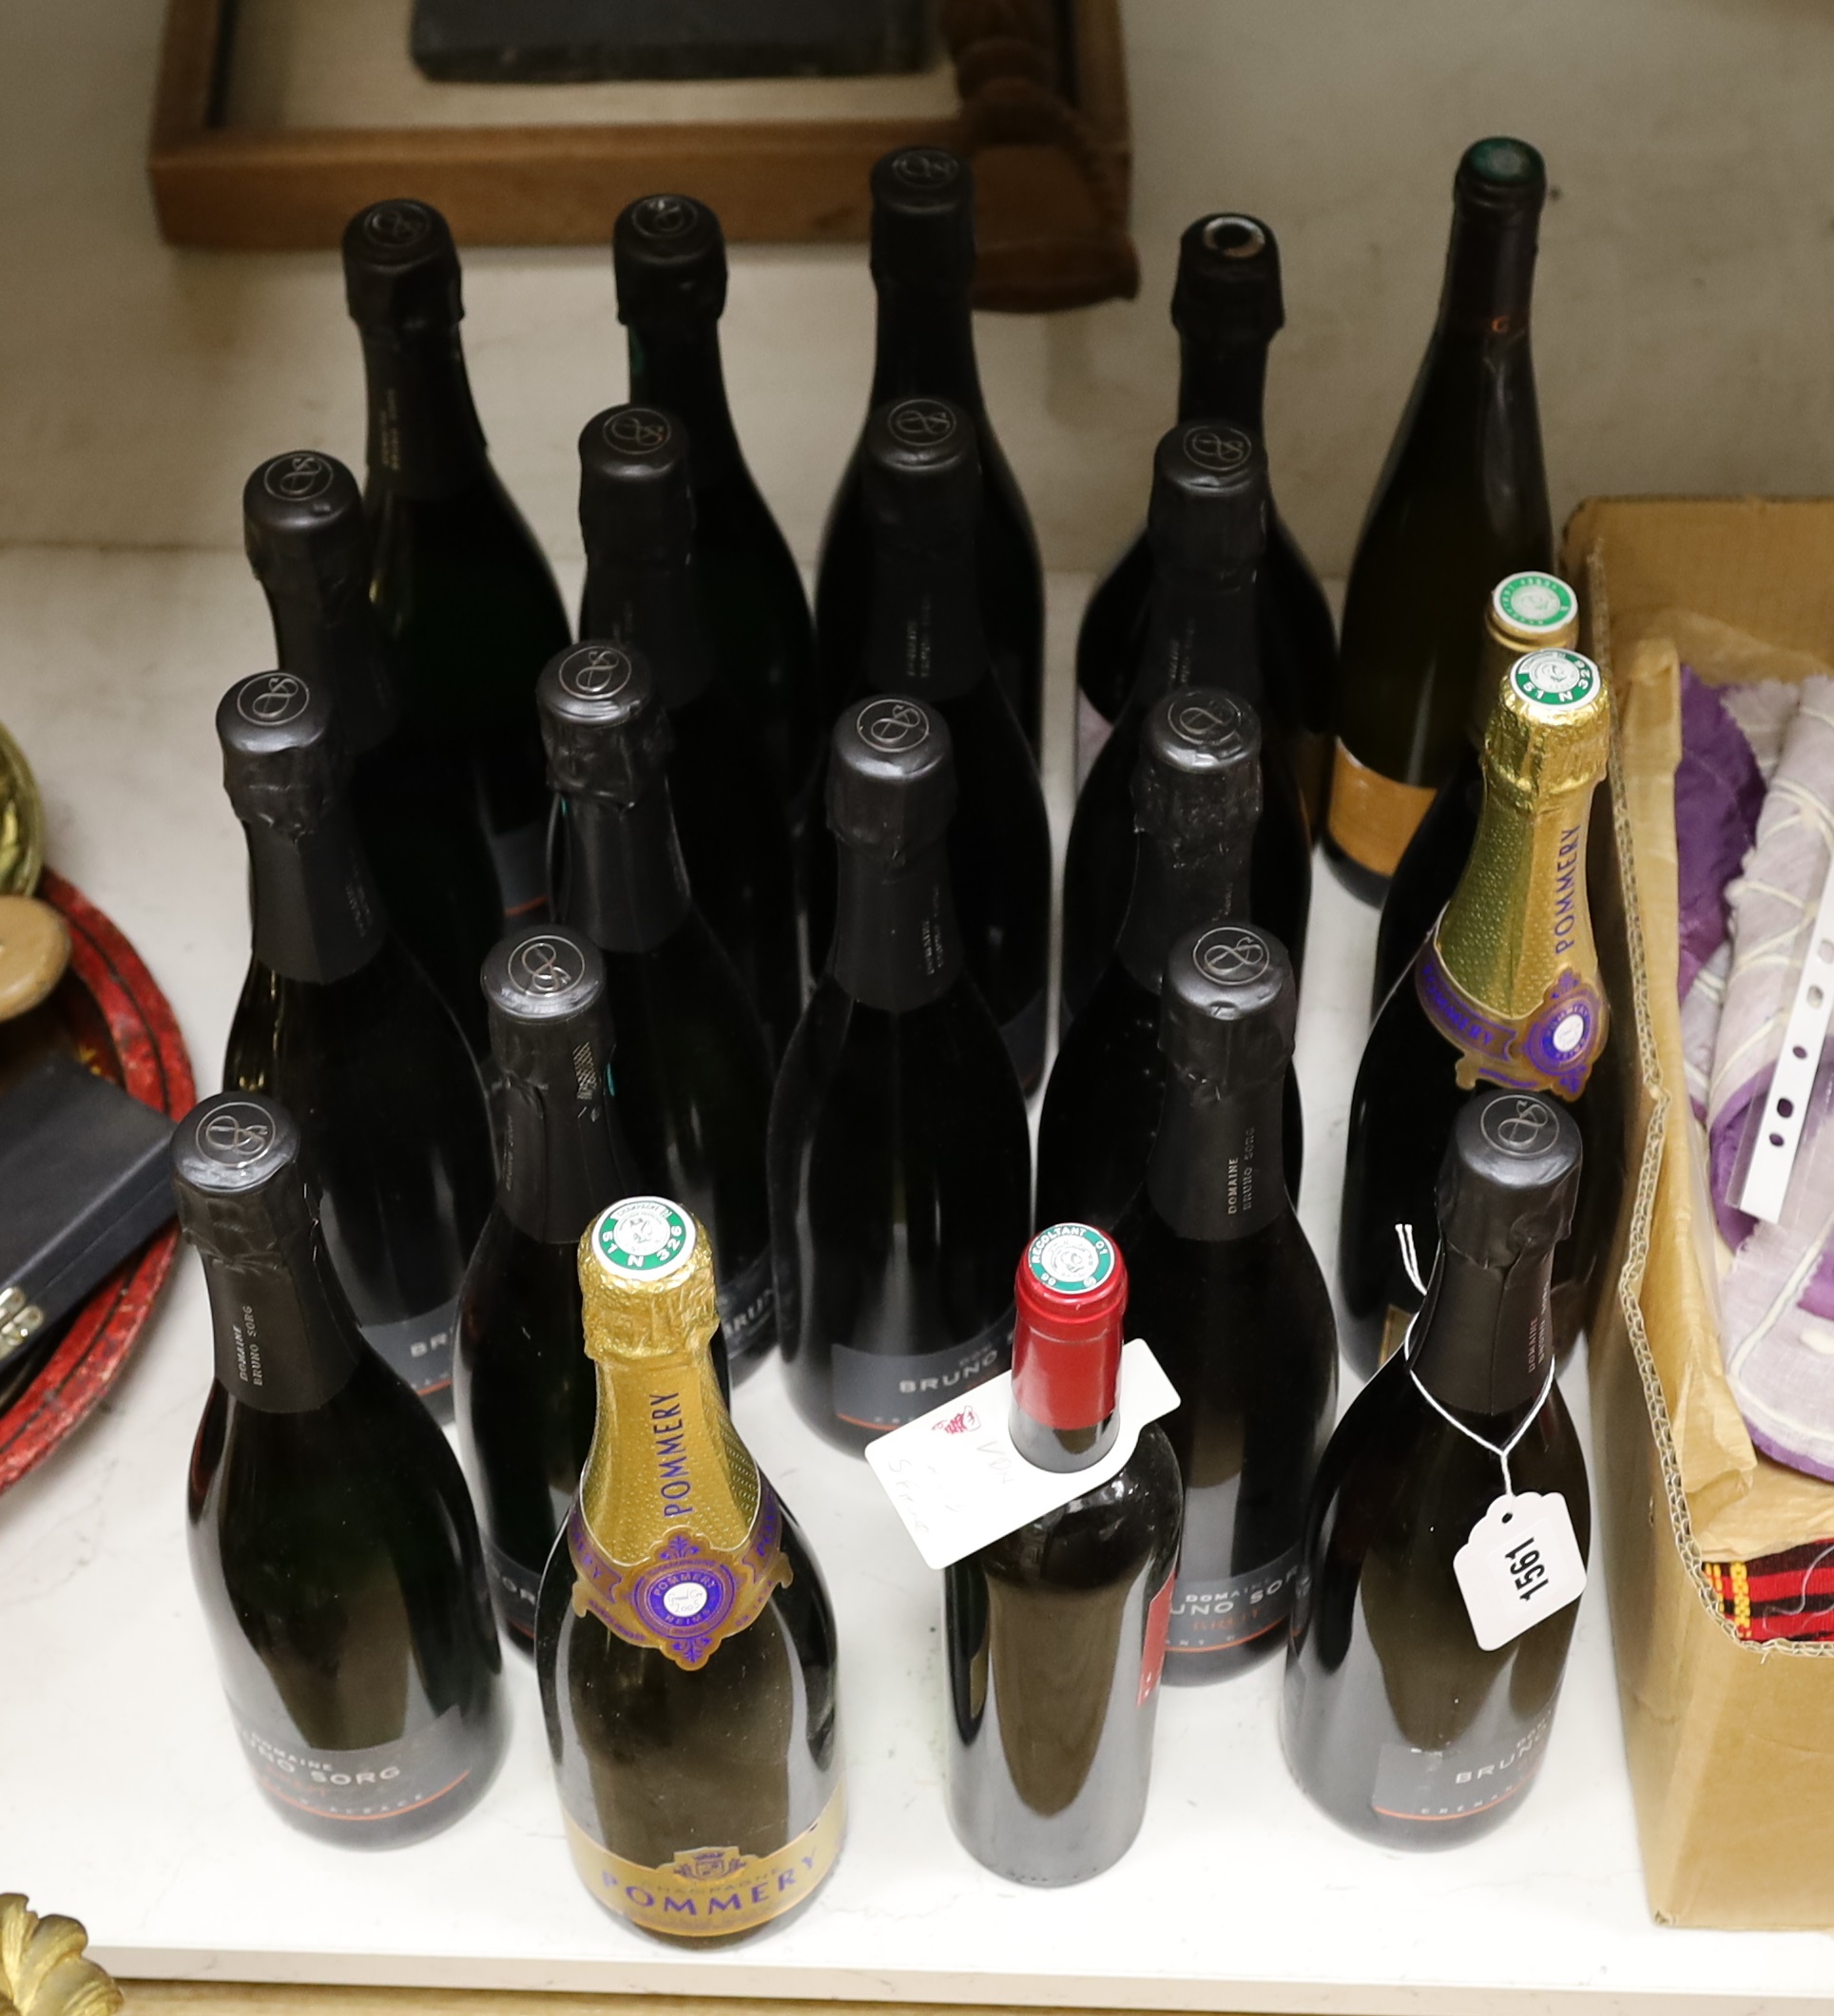 Twenty bottles of alcohol, mostly champagne including Domaine Bruno Sorg Brut and Champagne Pommery and a bottle of sparking tea